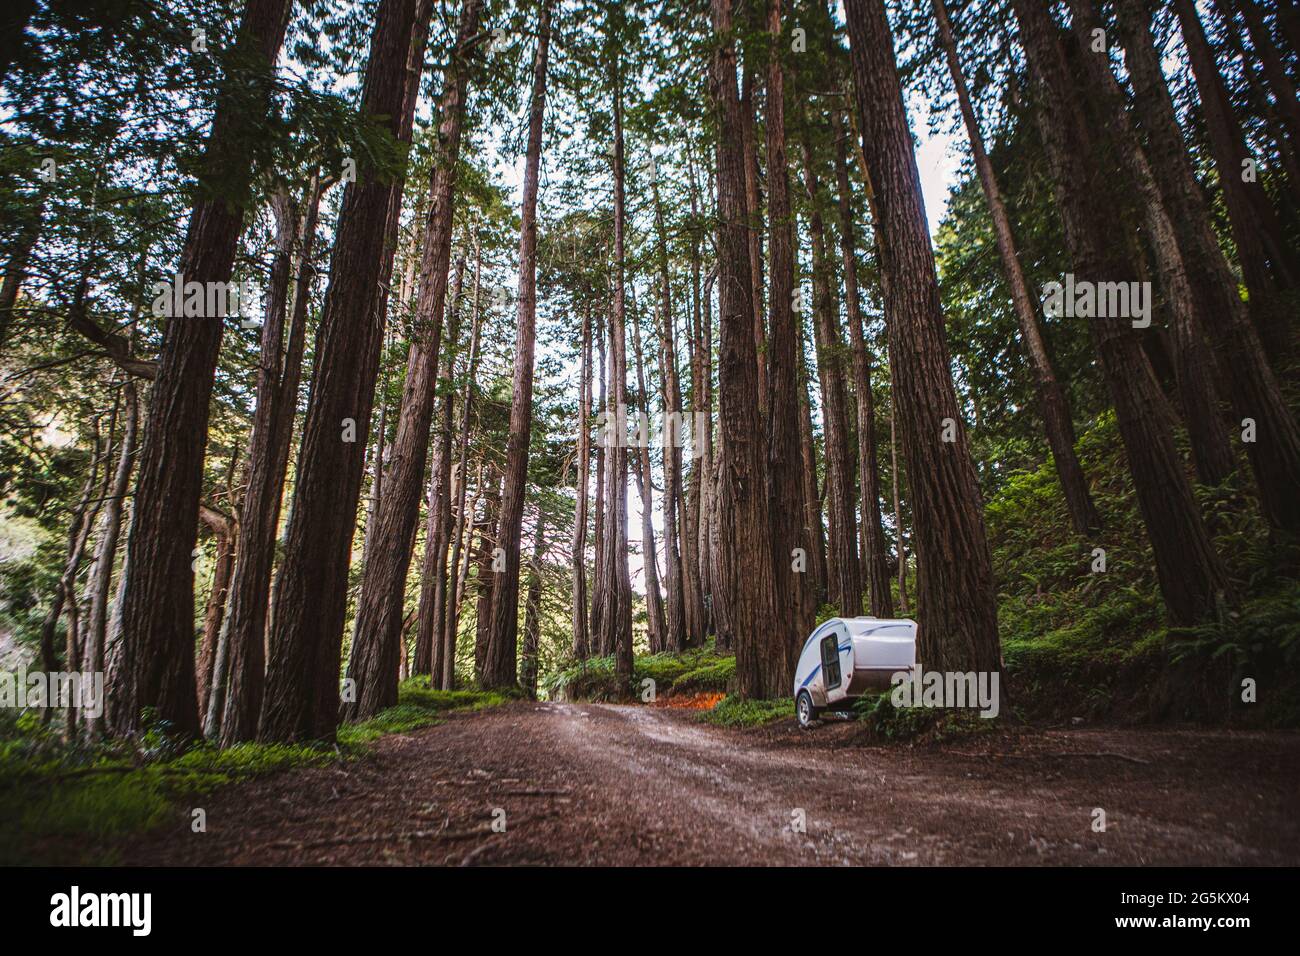 Small teardrop camper trailer parked in Redwood forest, California Stock Photo